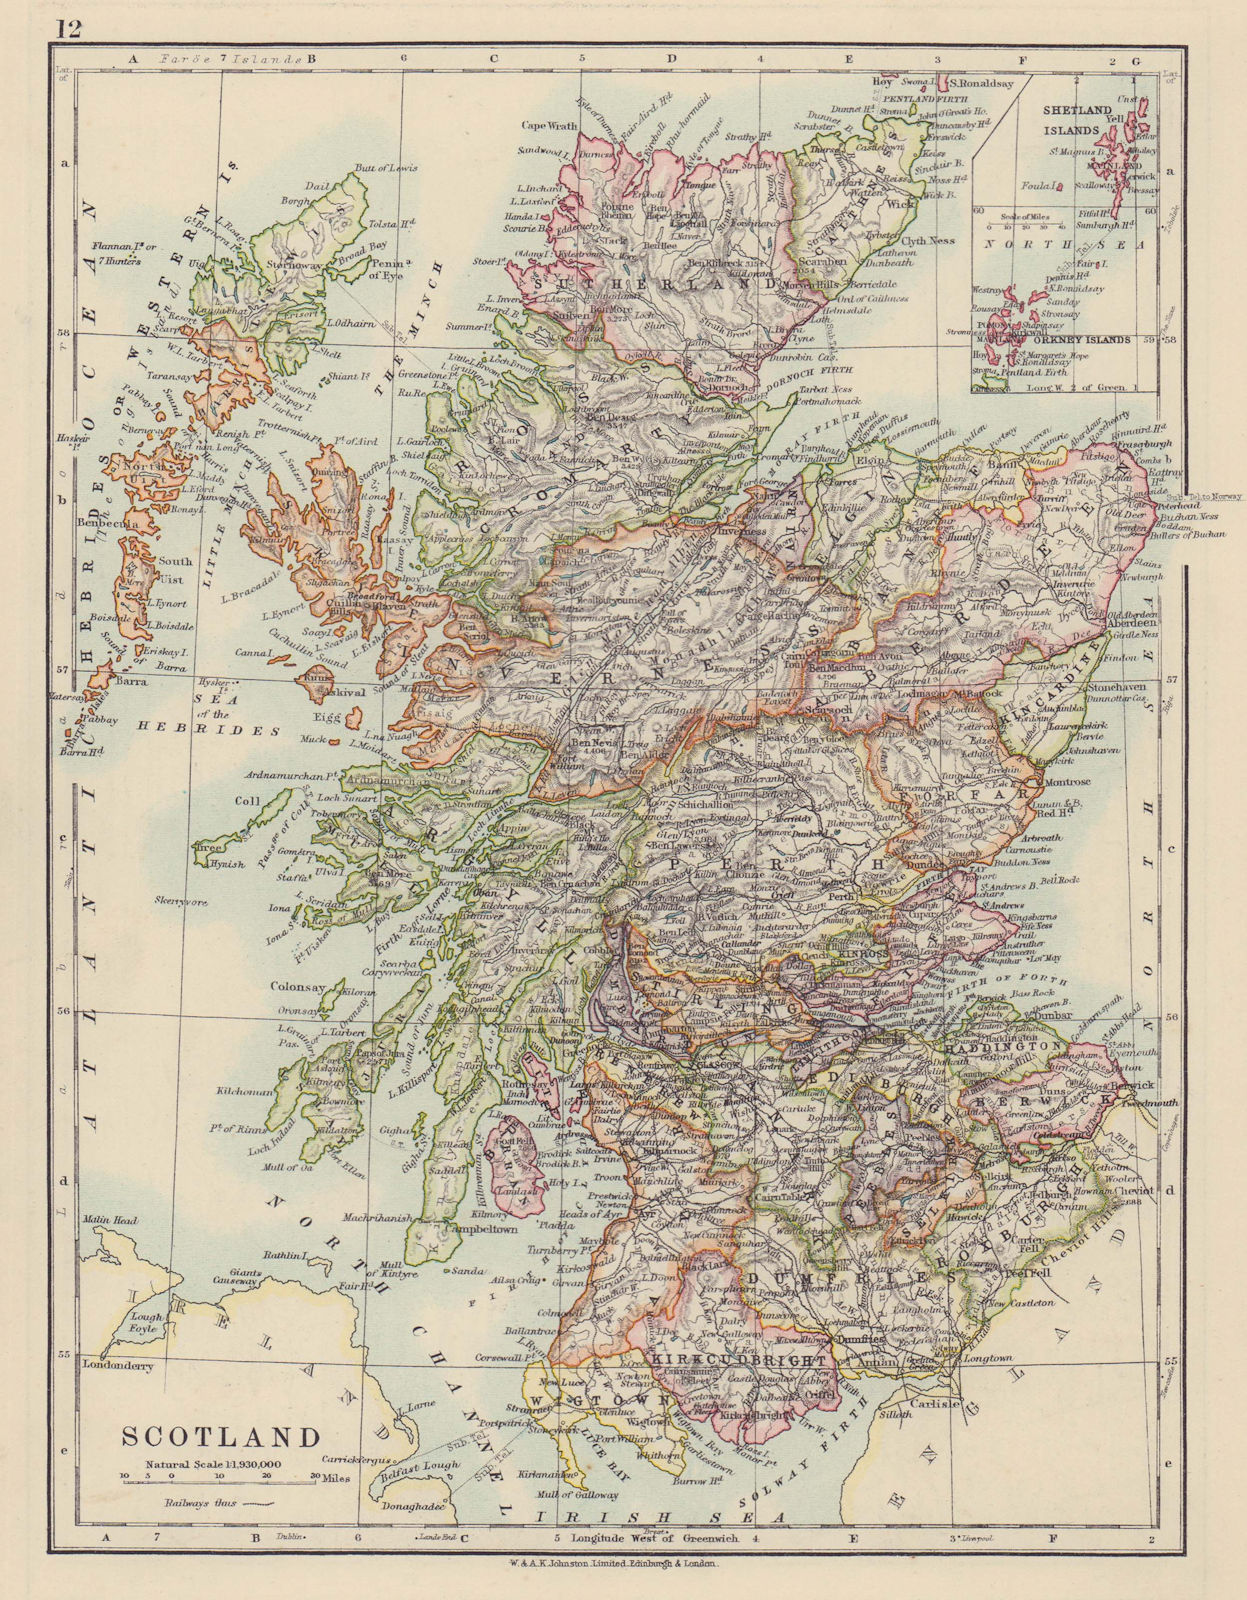 Associate Product SCOTLAND. Counties. Undersea telegraph cables. JOHNSTON 1910 old antique map